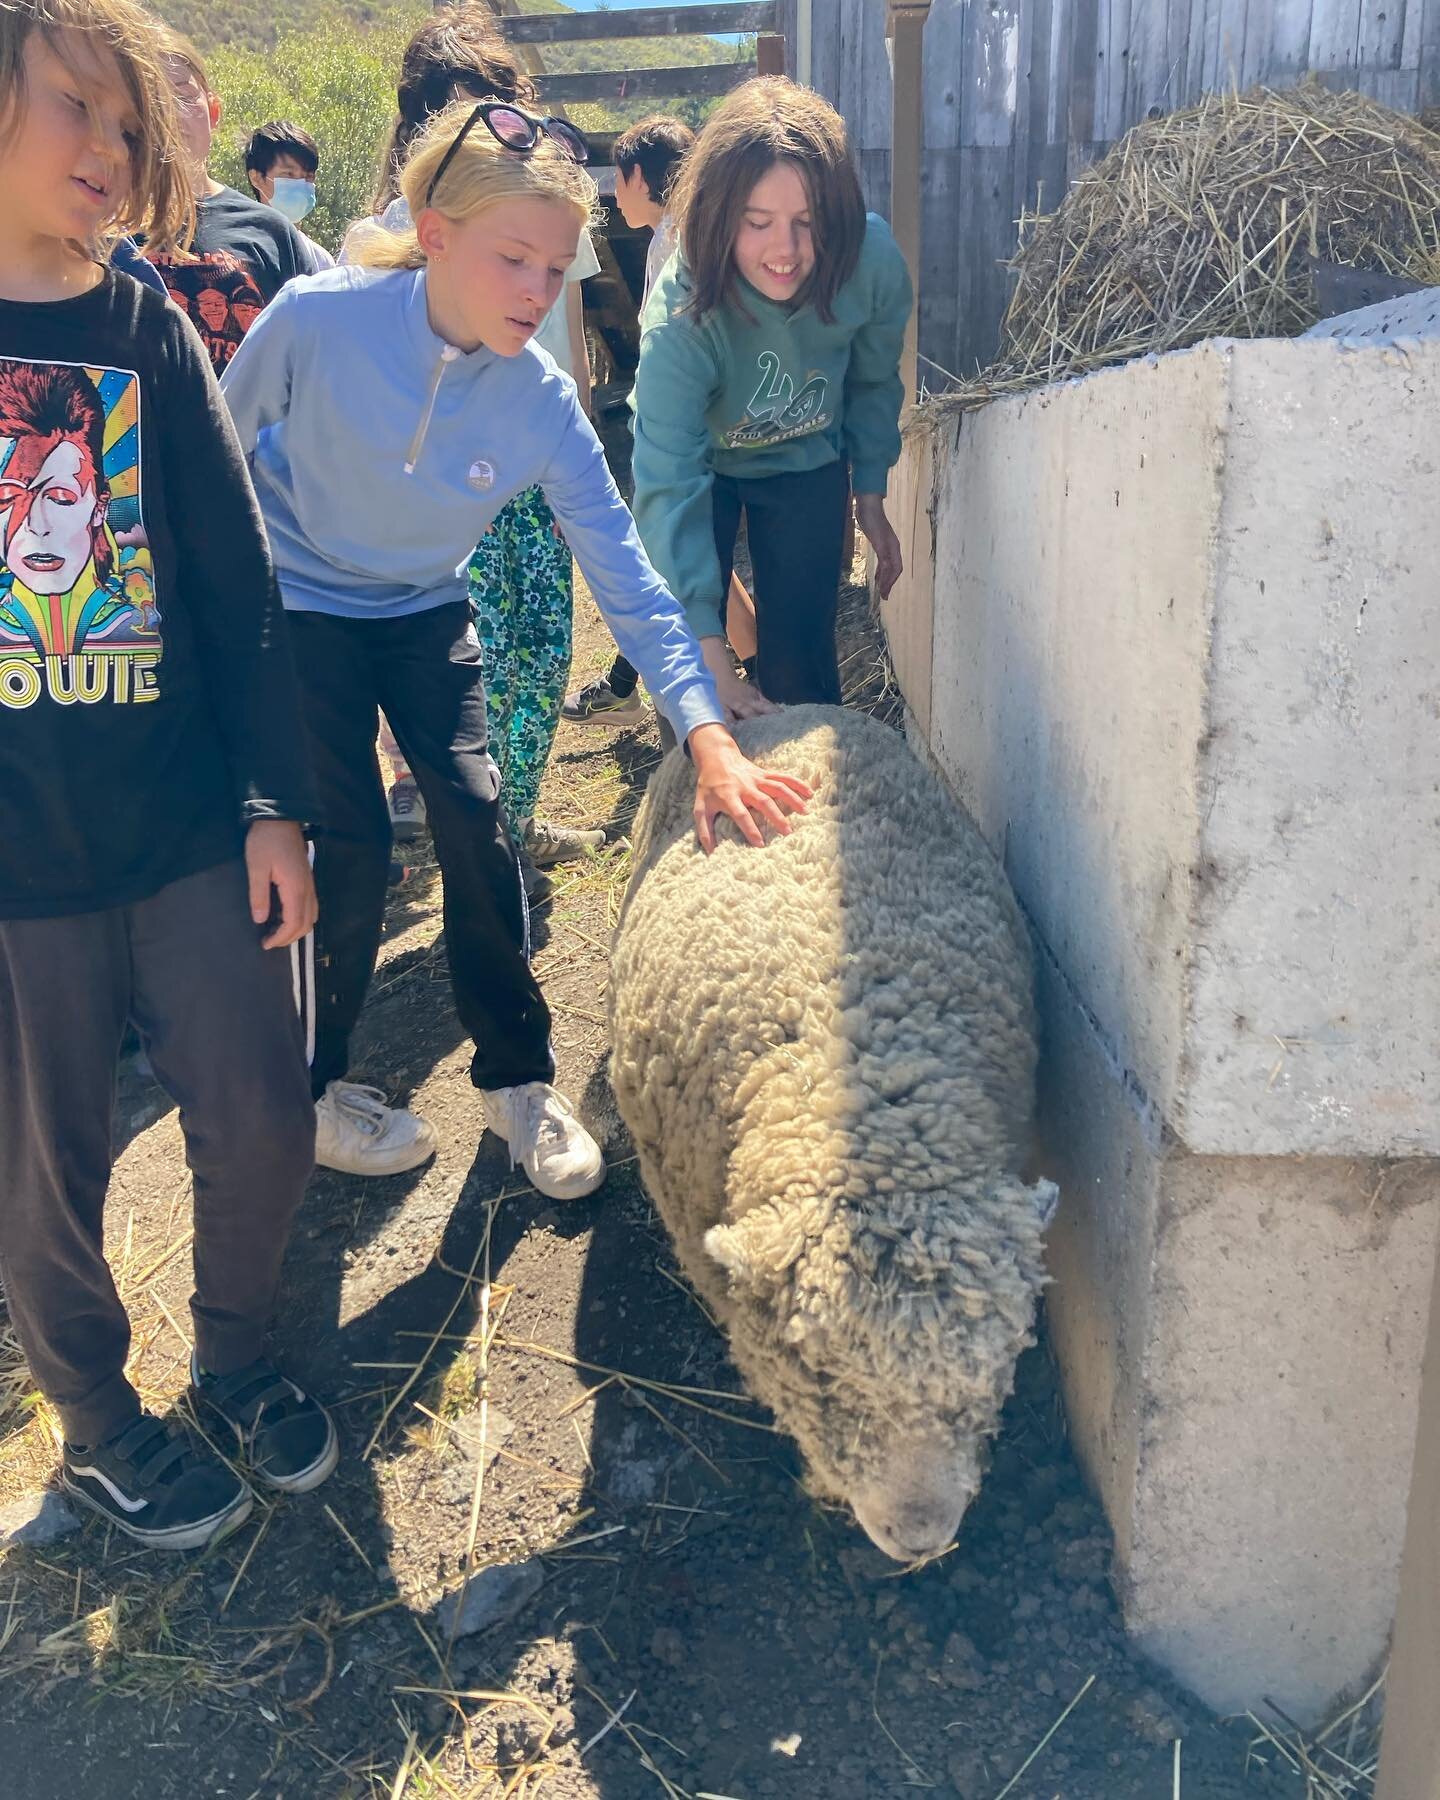 A highlight of Wednesday - break from the building day - is visiting the animals at Elkus Ranch. Many thanks to Leslie and all the Elkus crew for being such amazing hosts!